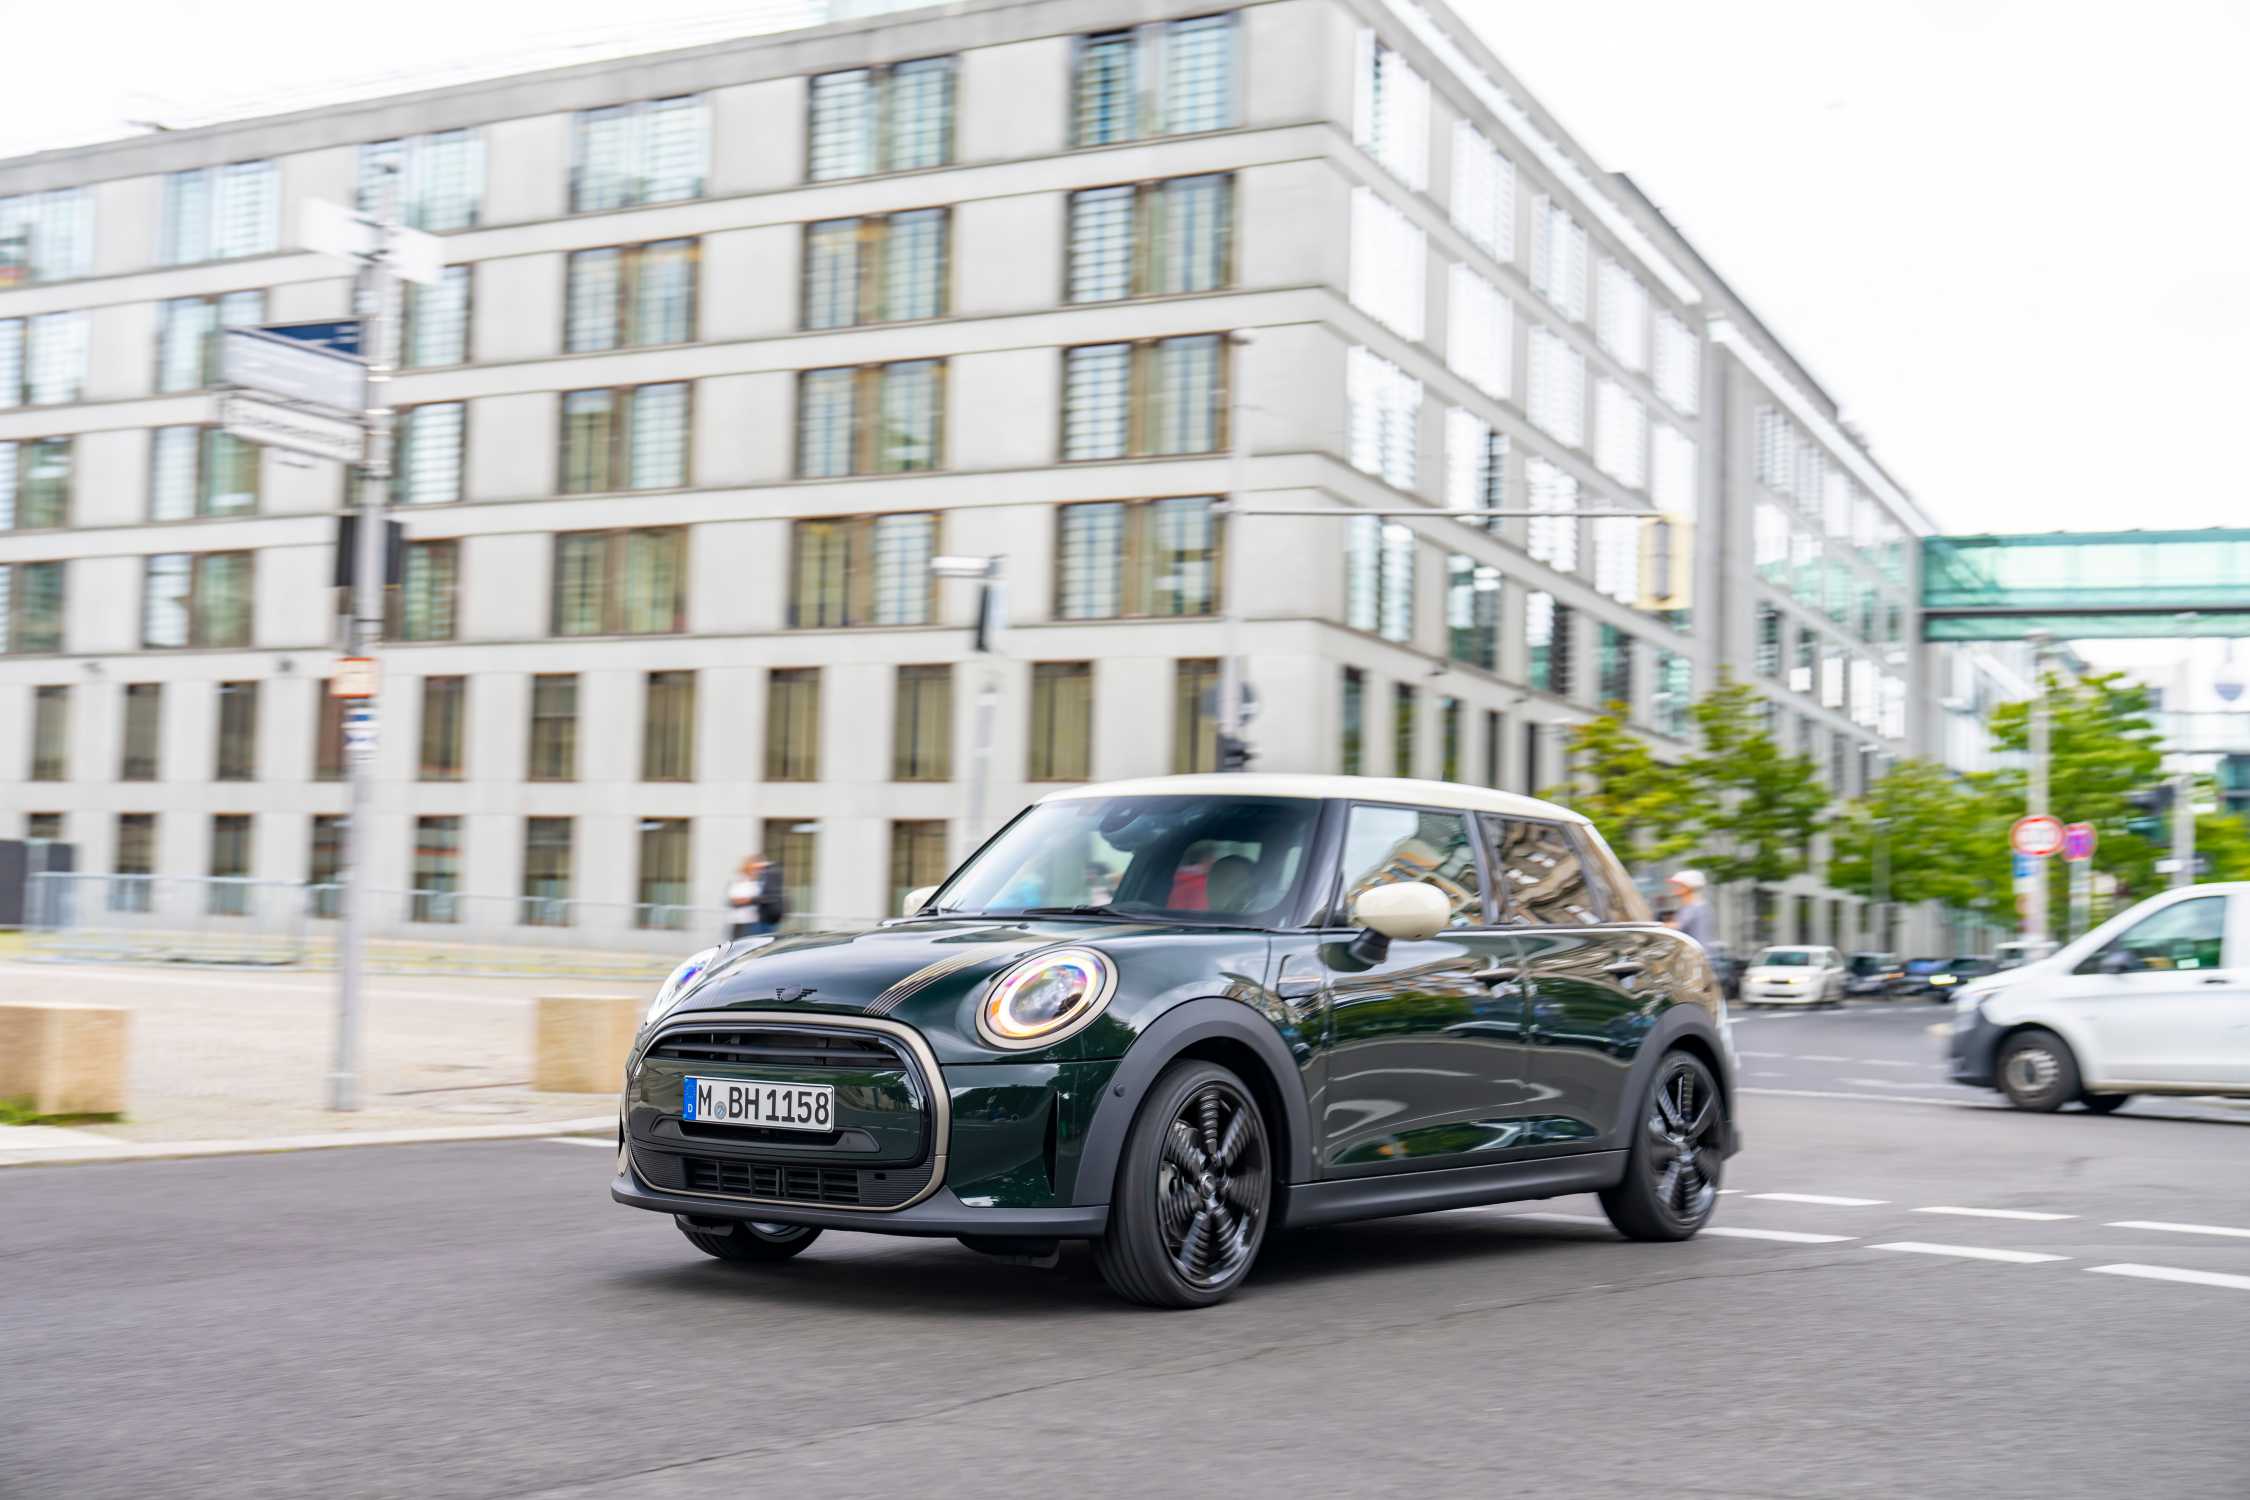 Untamed, Resolute and Untold: New MINI Edition models set to ramp up ...